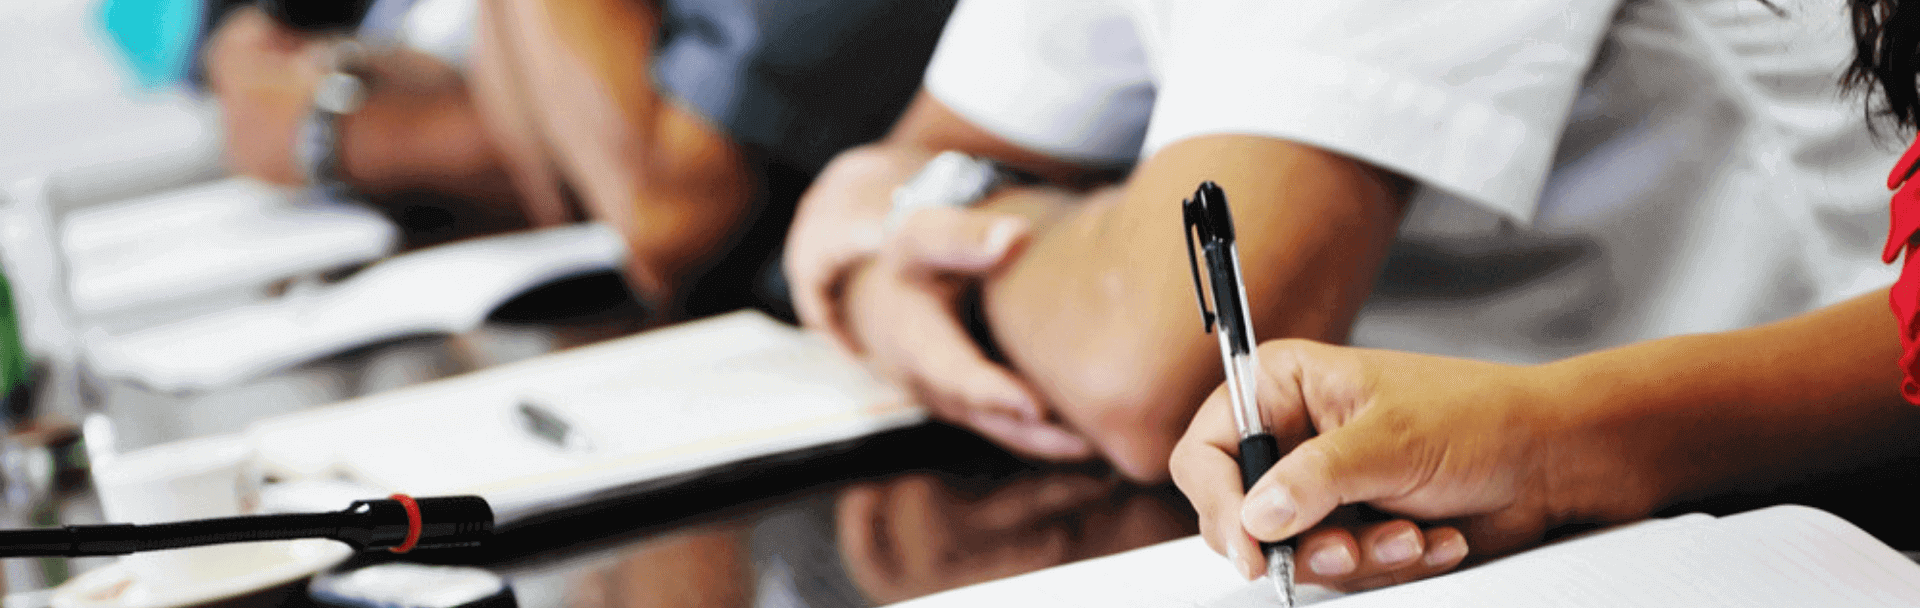 How to Take Notes in Medical School | Oxford Scholastica